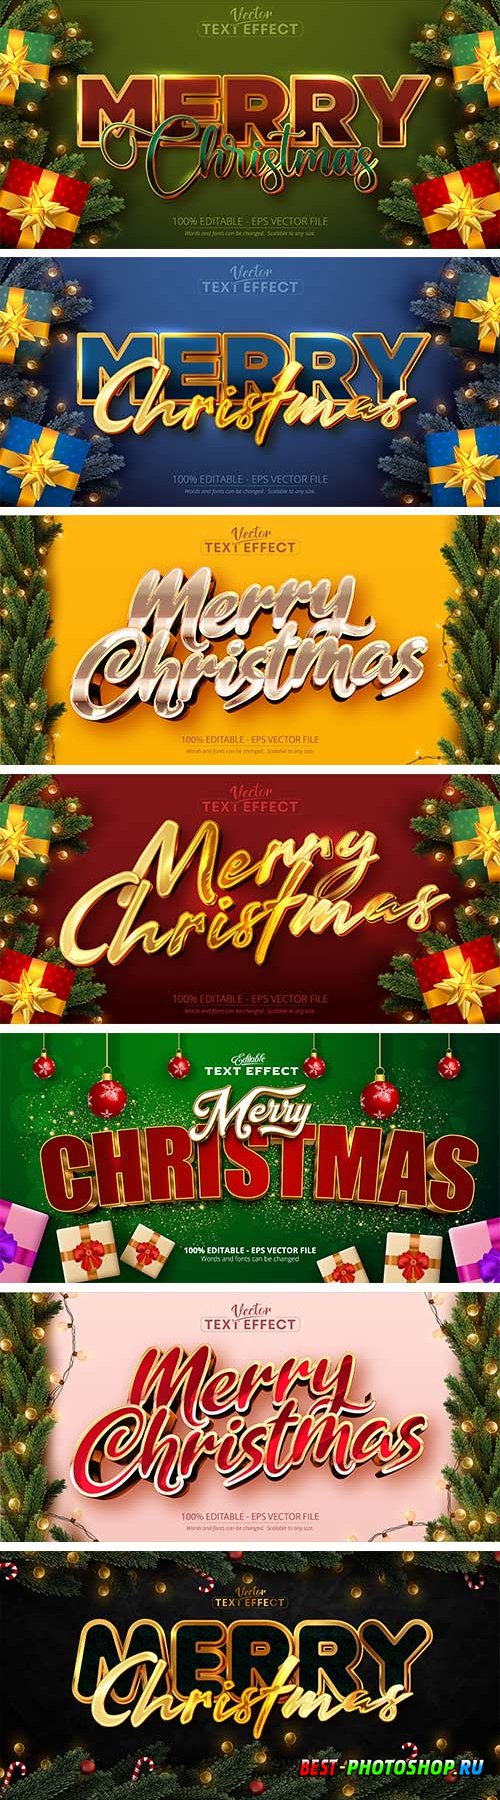 2022 New year and christmas editable text effect vector vol 24